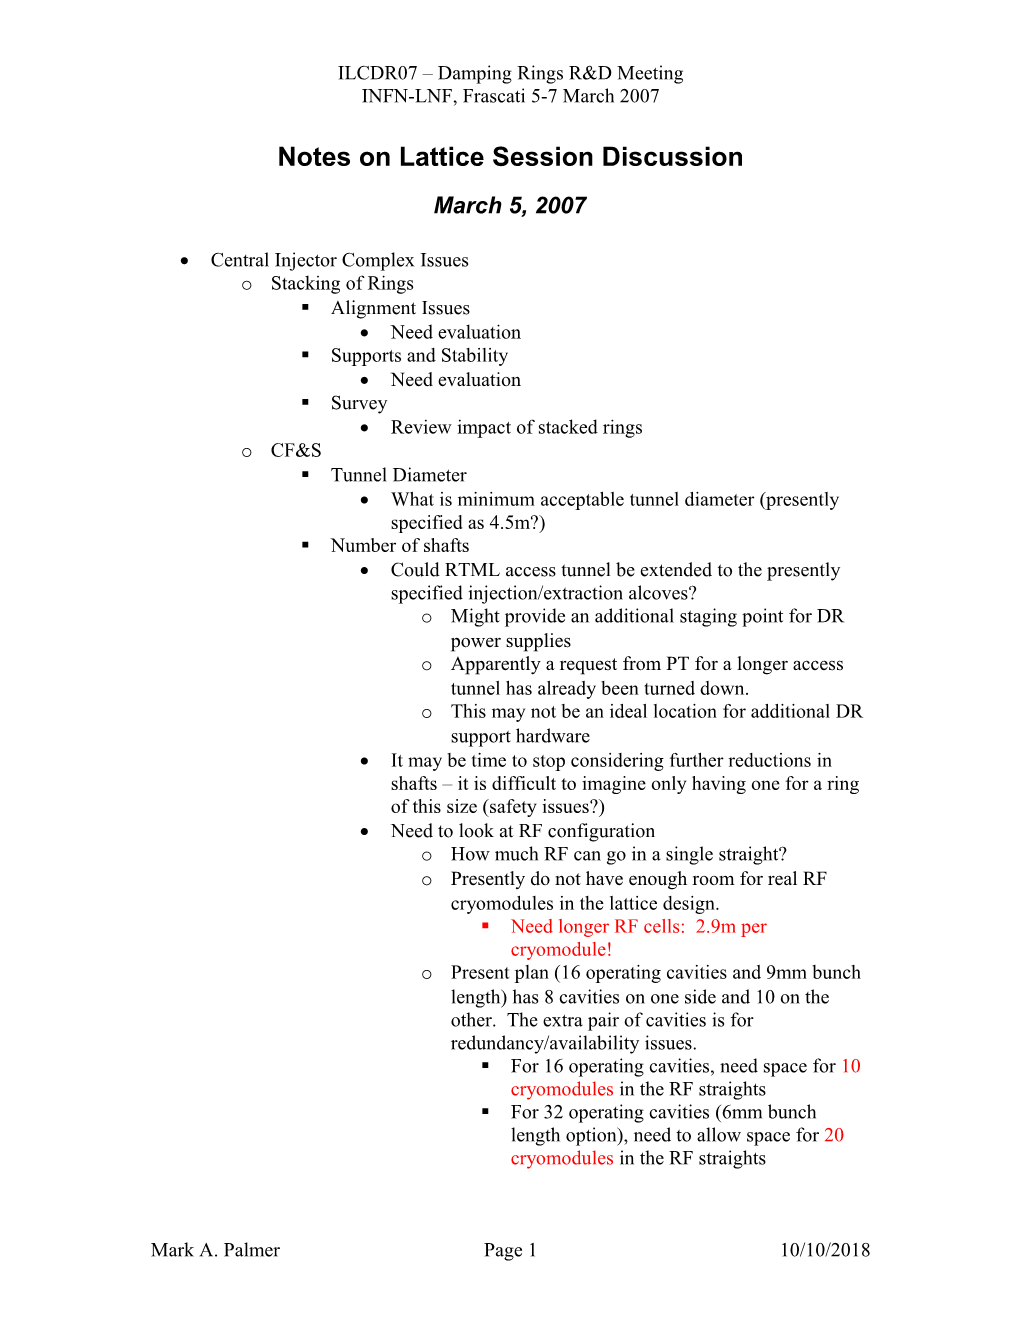 Notes on Lattice Session Discussion